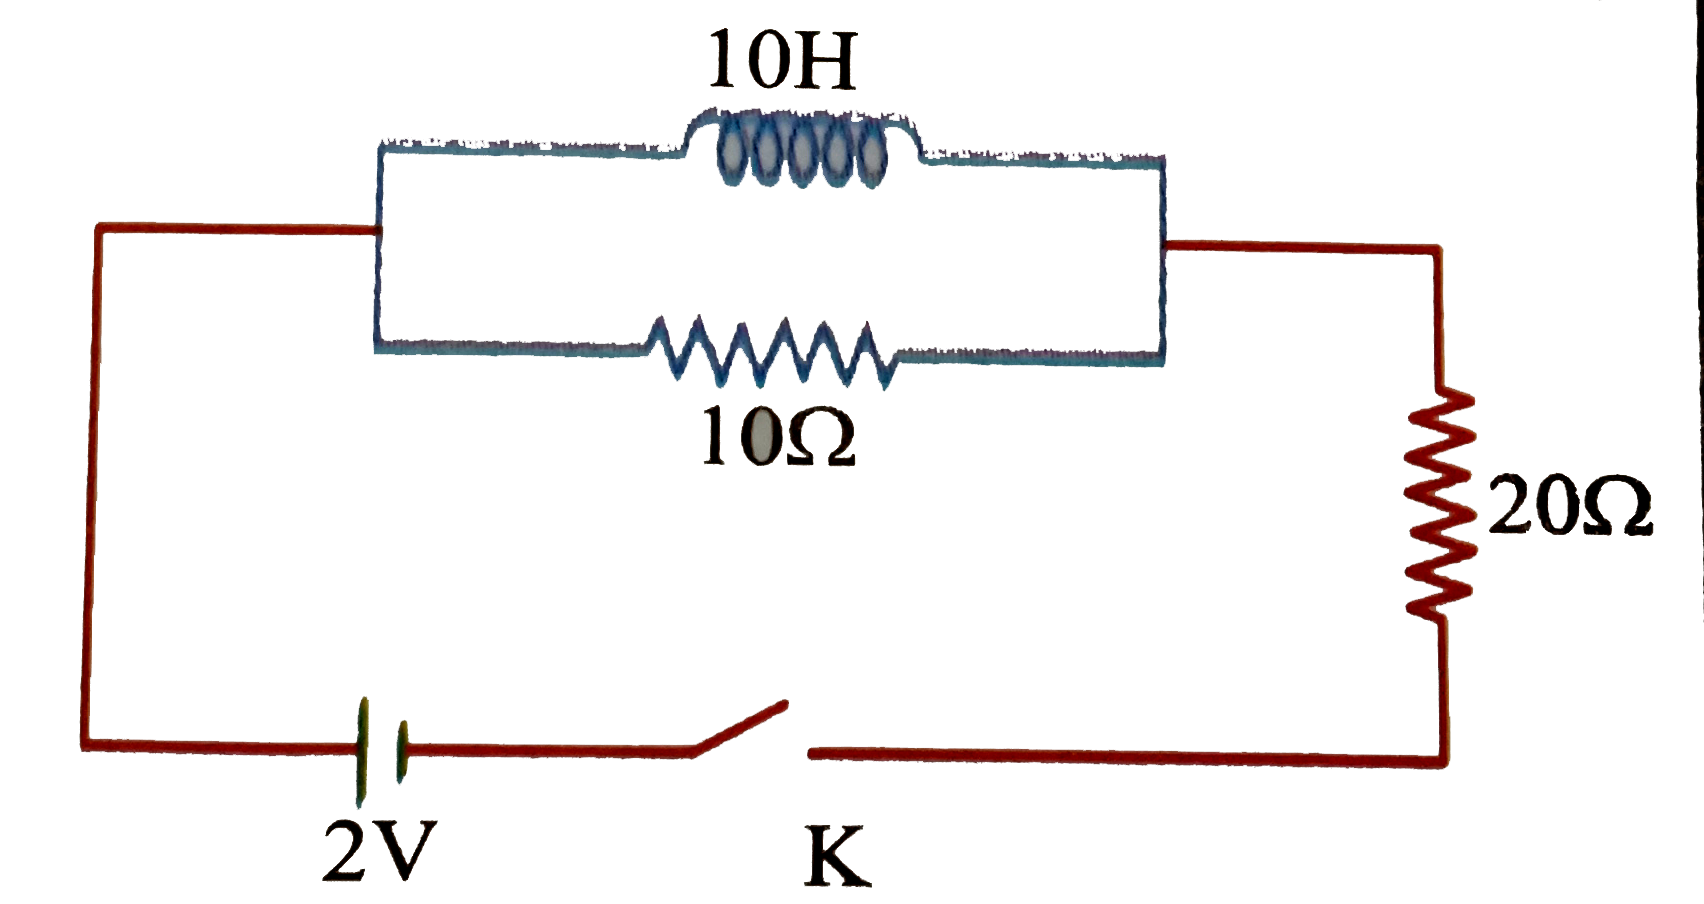 The key 'K' is switched on at t = 0. Then the currents through battery at t = 0 and t = oo are